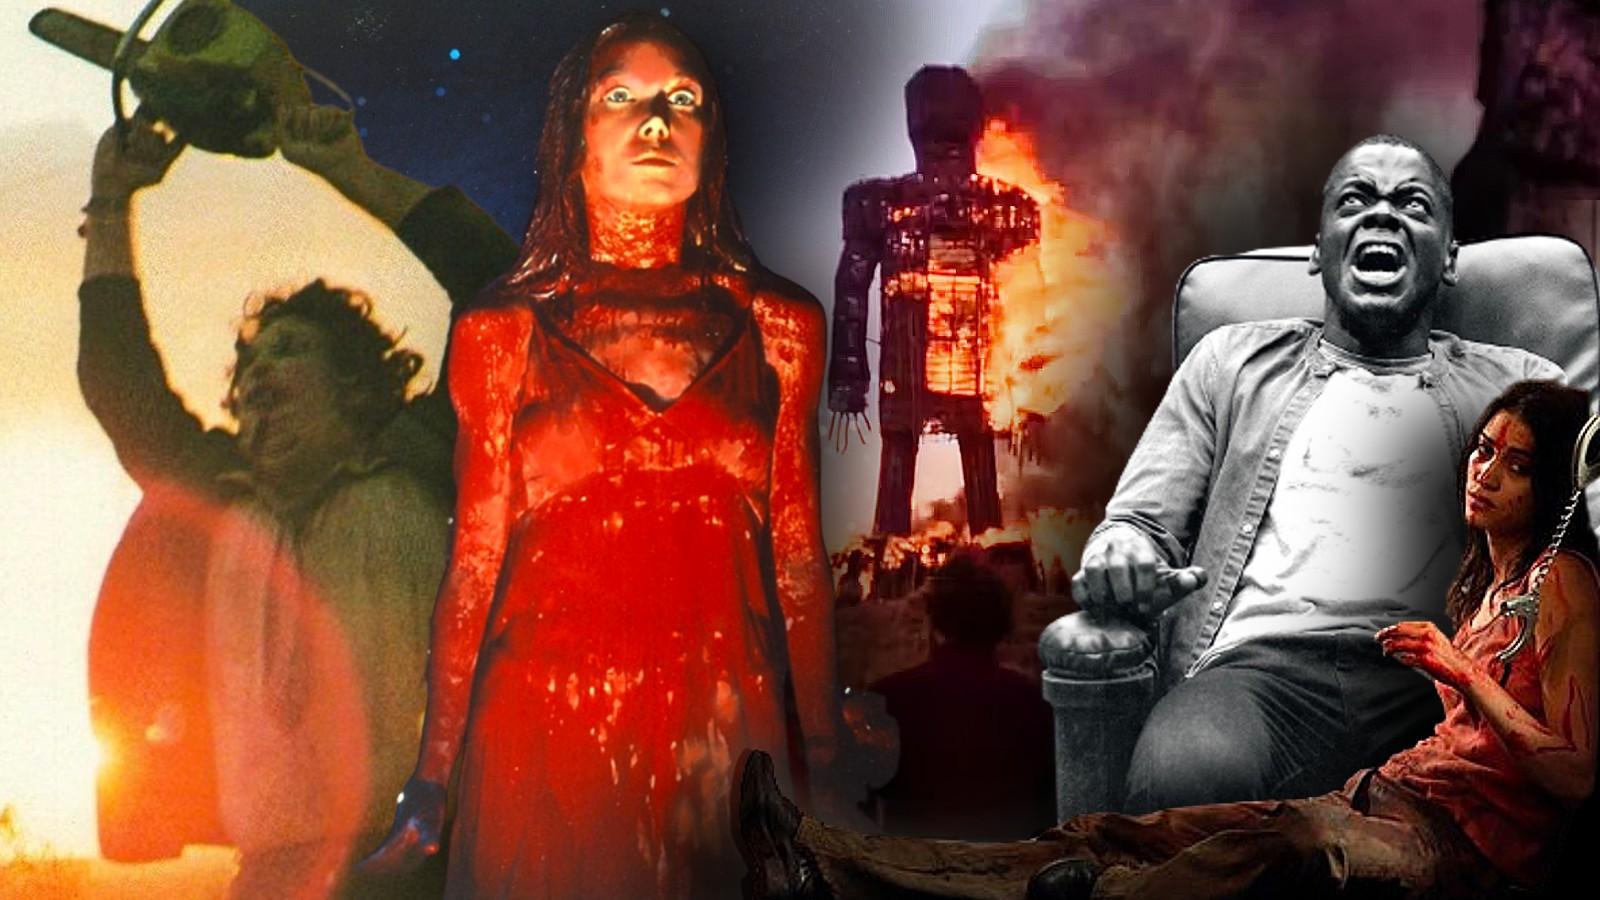 Stills from The Texas Chainsaw Massacre, Carrie, The Wicker Man, Get Out, and Martyrs